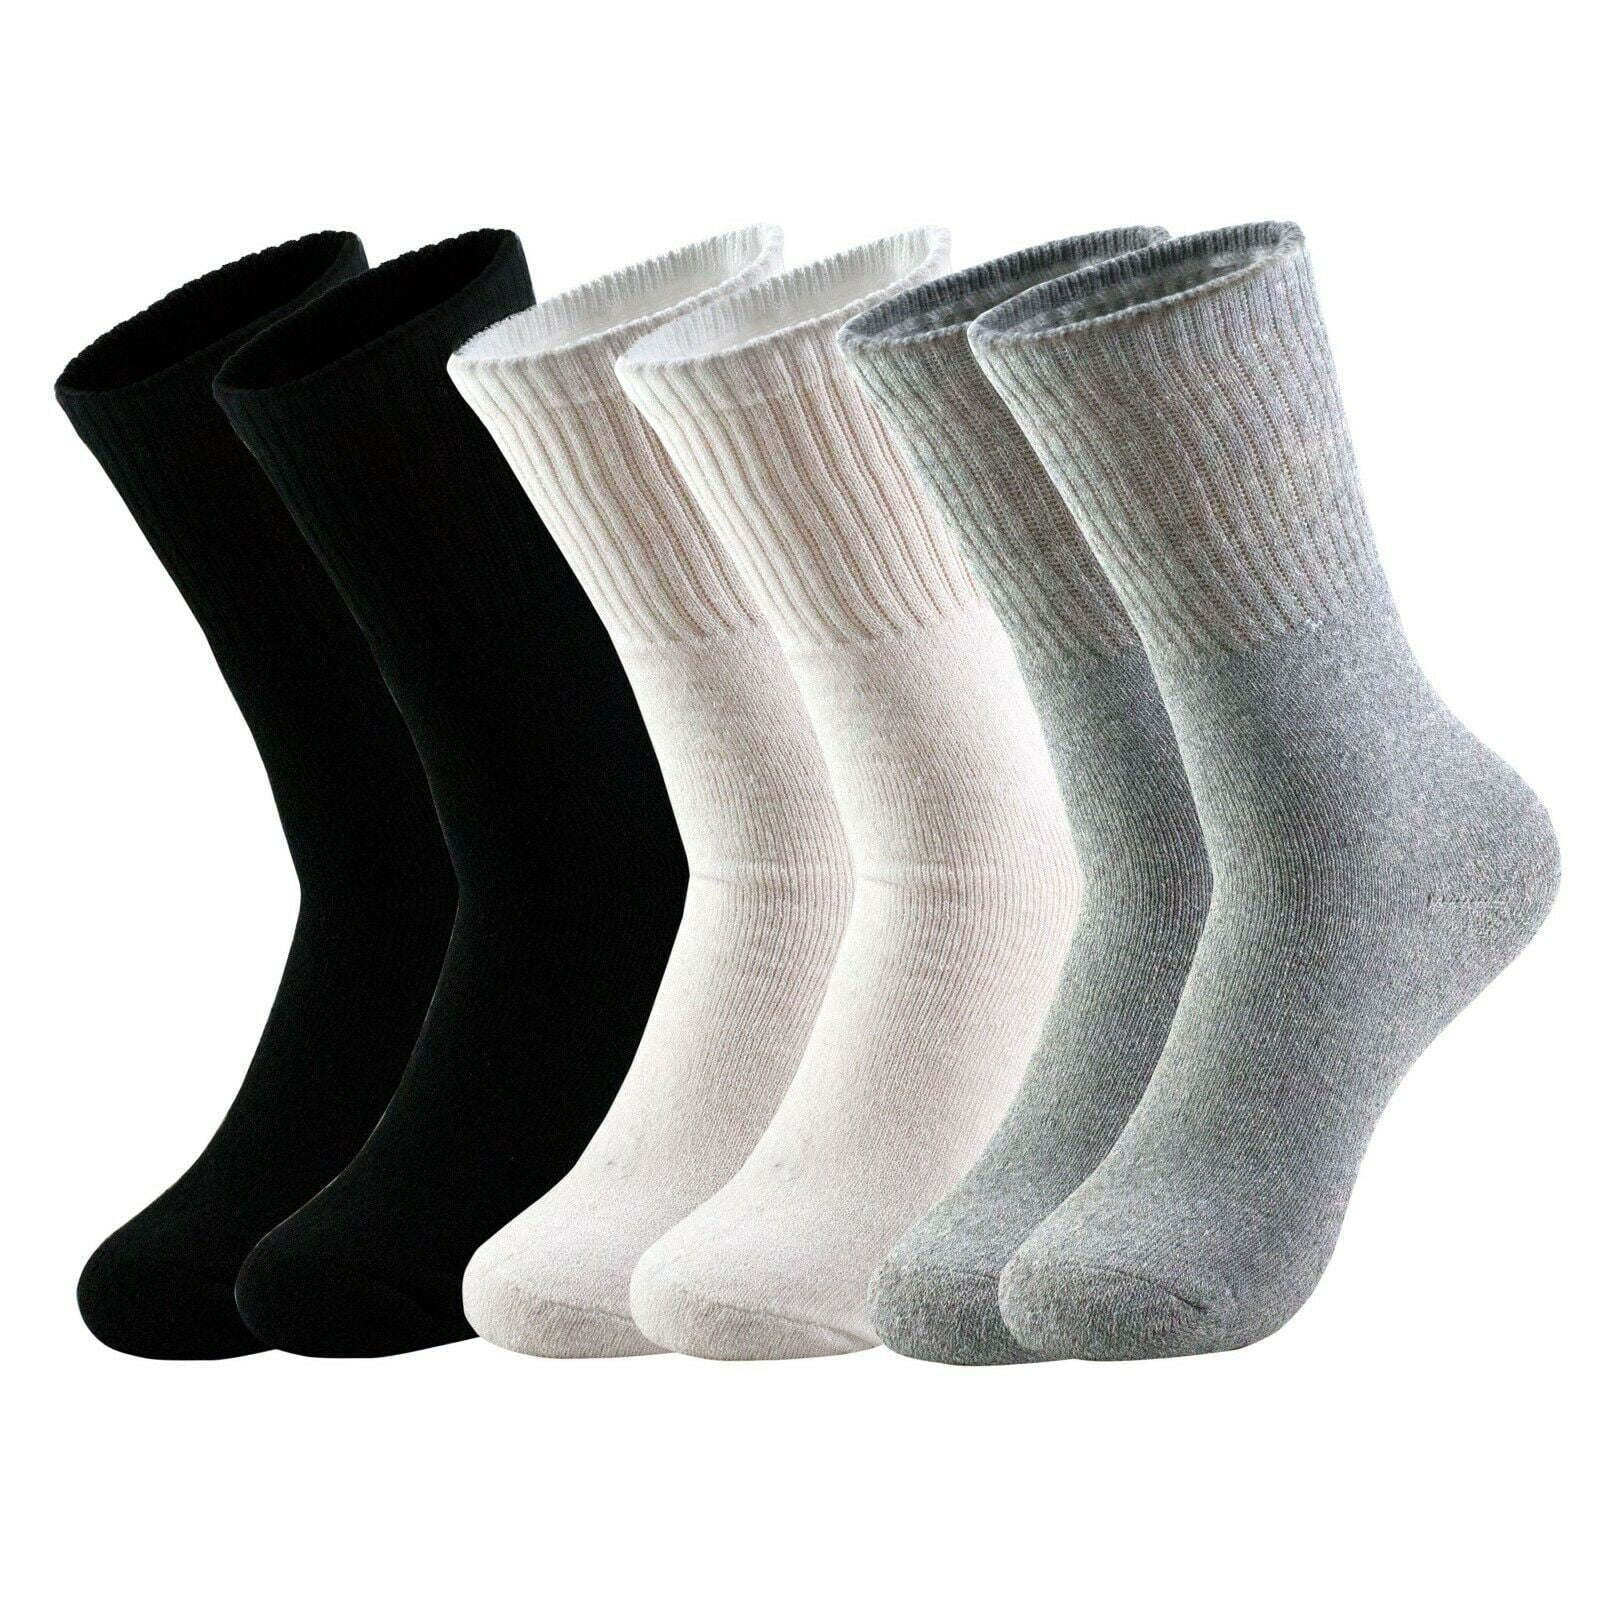 Maple Leaf 3 Pairs Crew Mens Athletic Sport Socks Cotton Size 9-11 10-13 Gray 